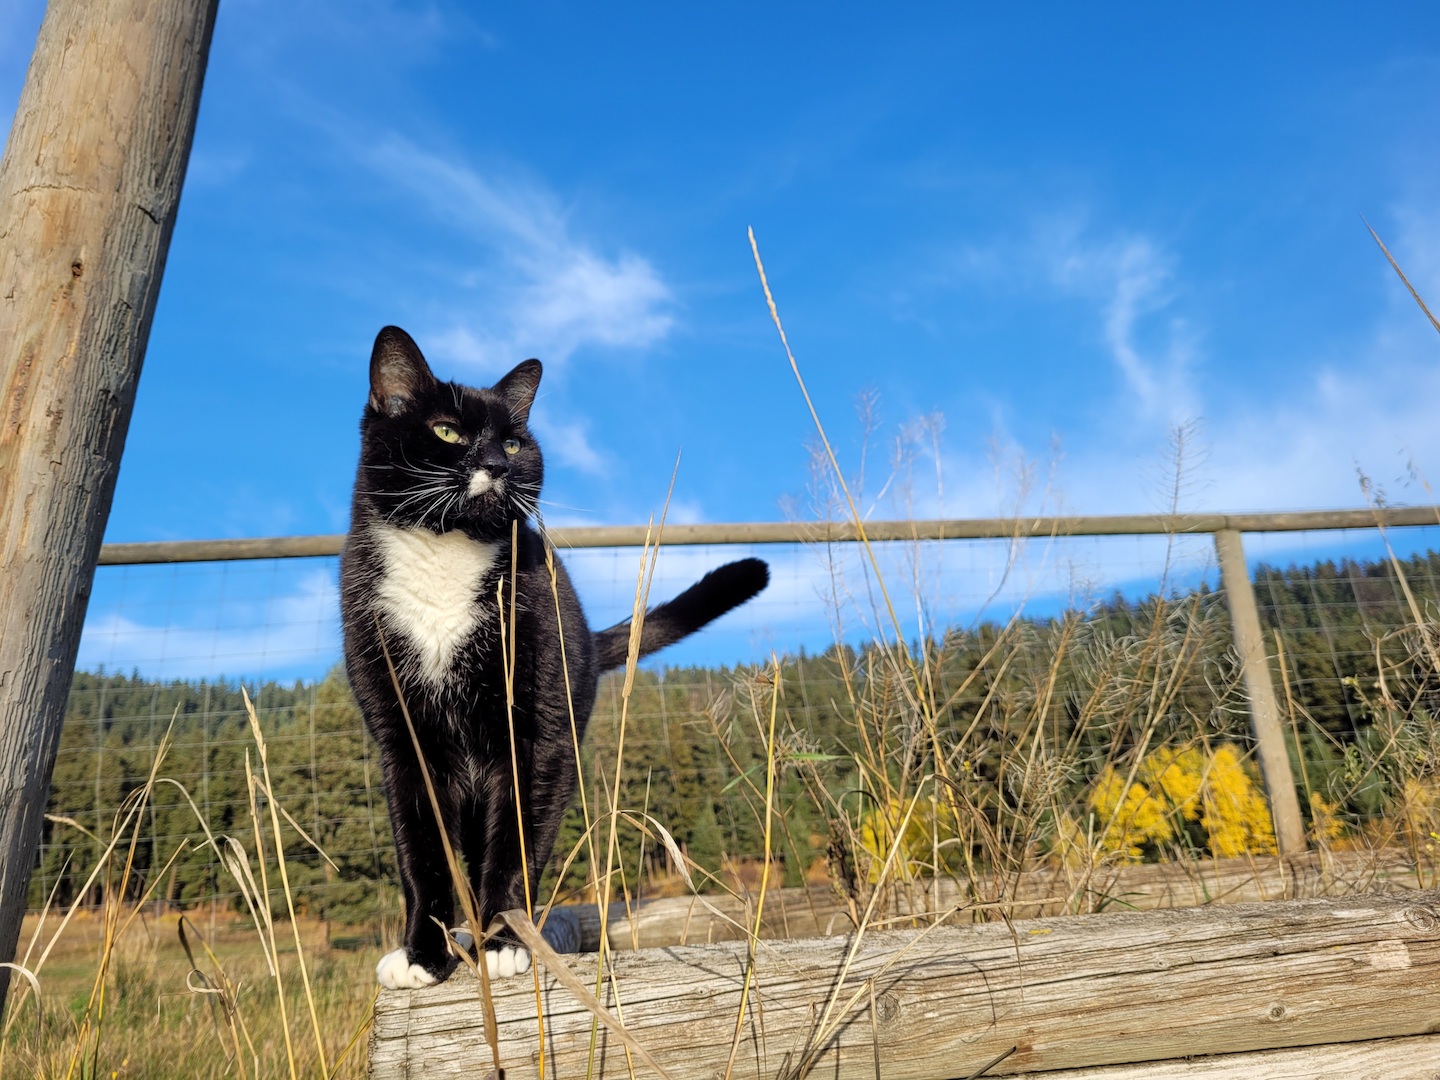 photo of a tuxedo cat standing on a wooden garden wall amid overgrown grass, with a big blue sky in the background